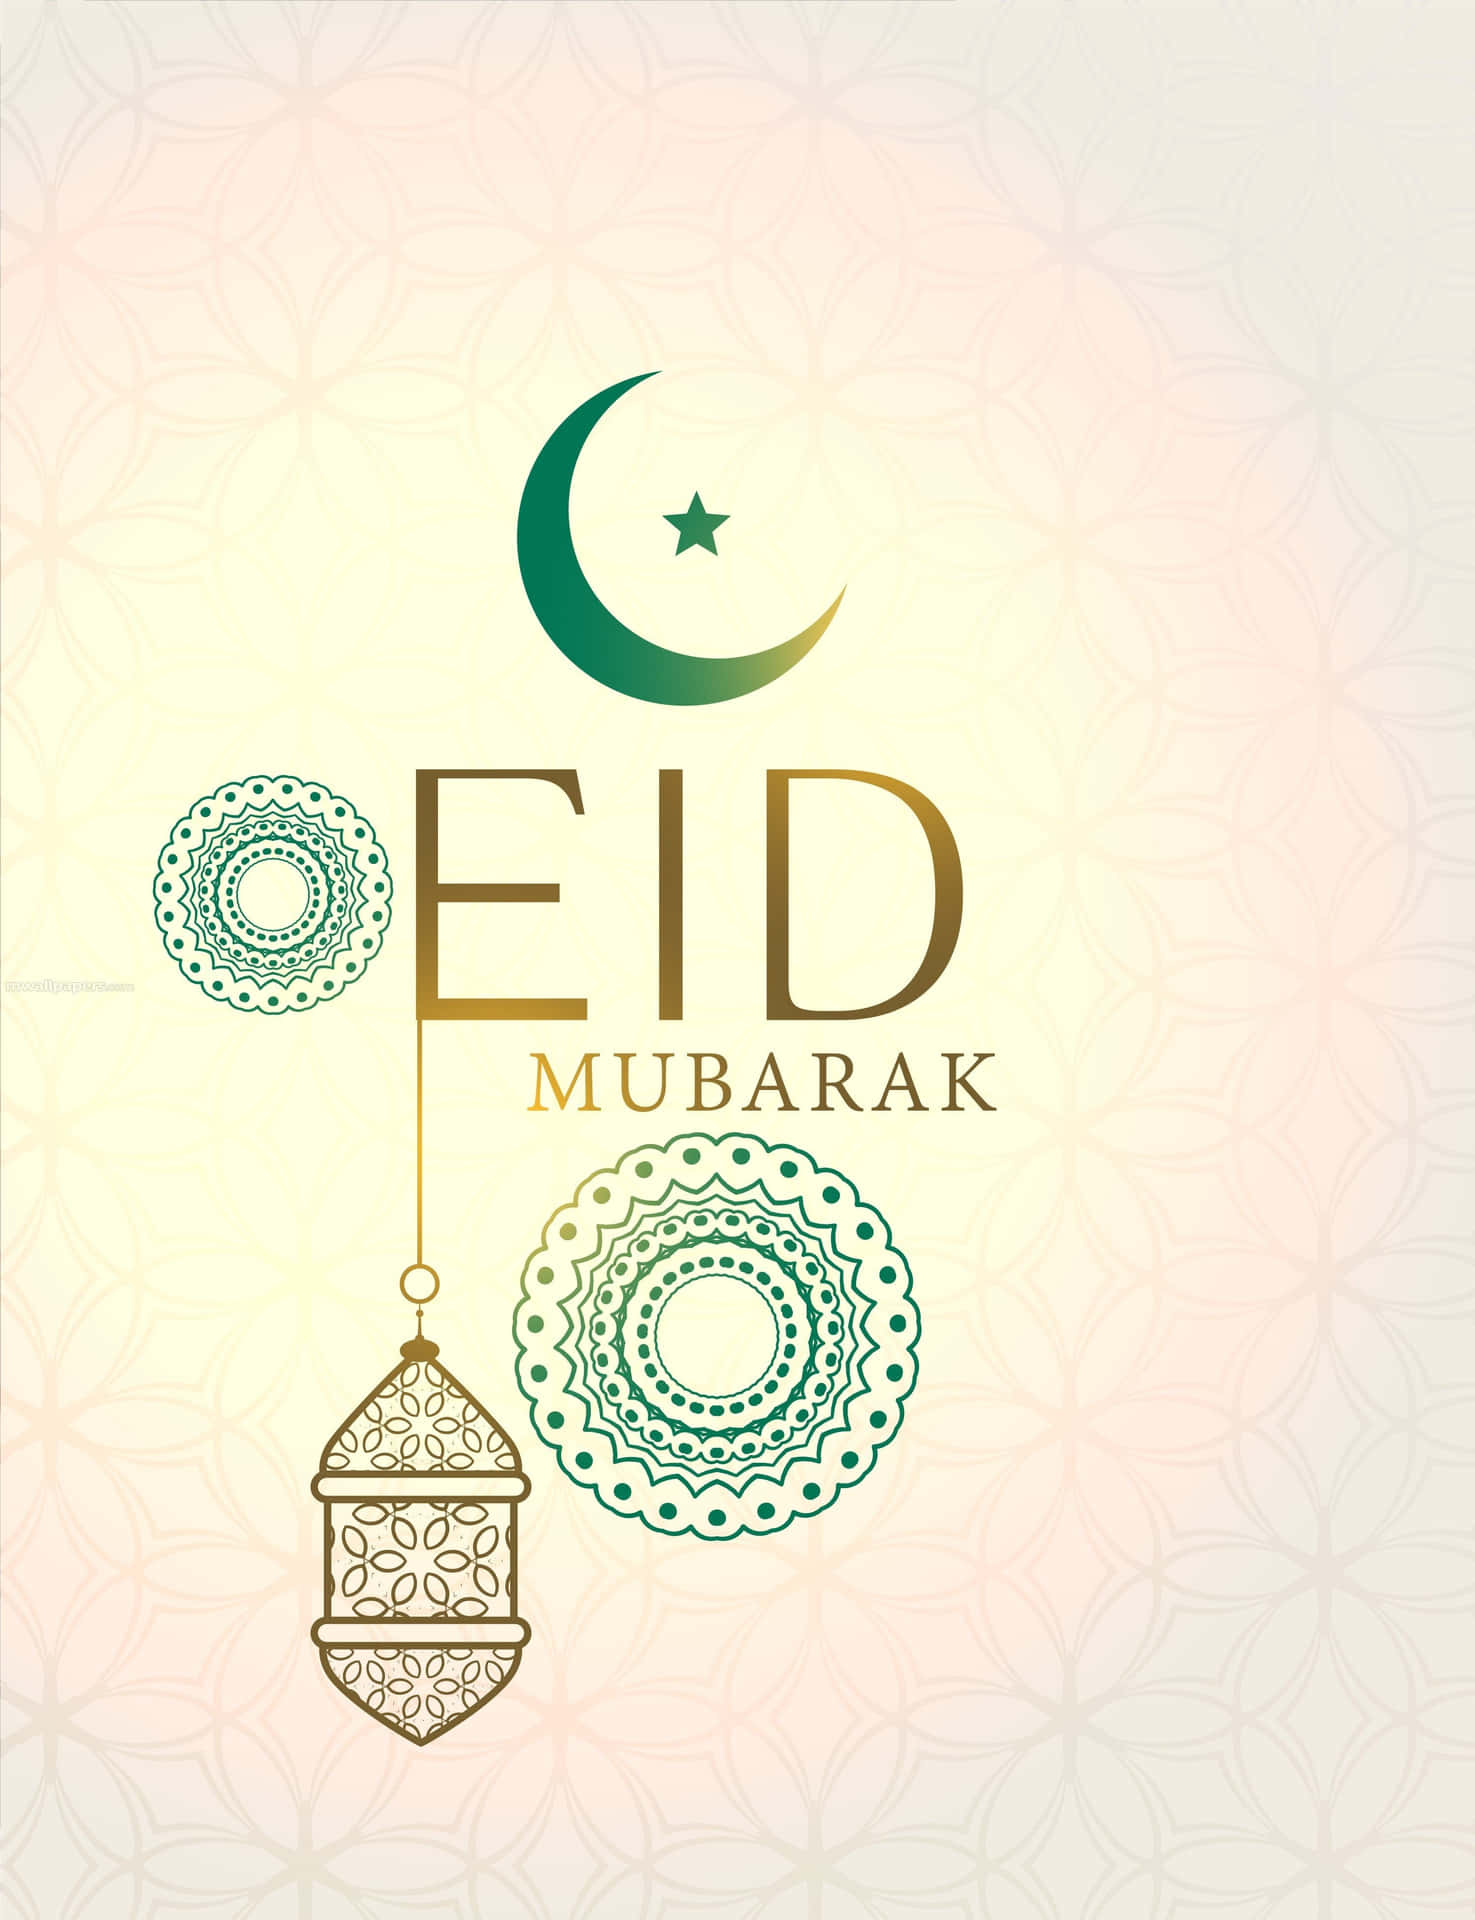 Eid Mubarak Greeting Card With A Lantern And Crescent